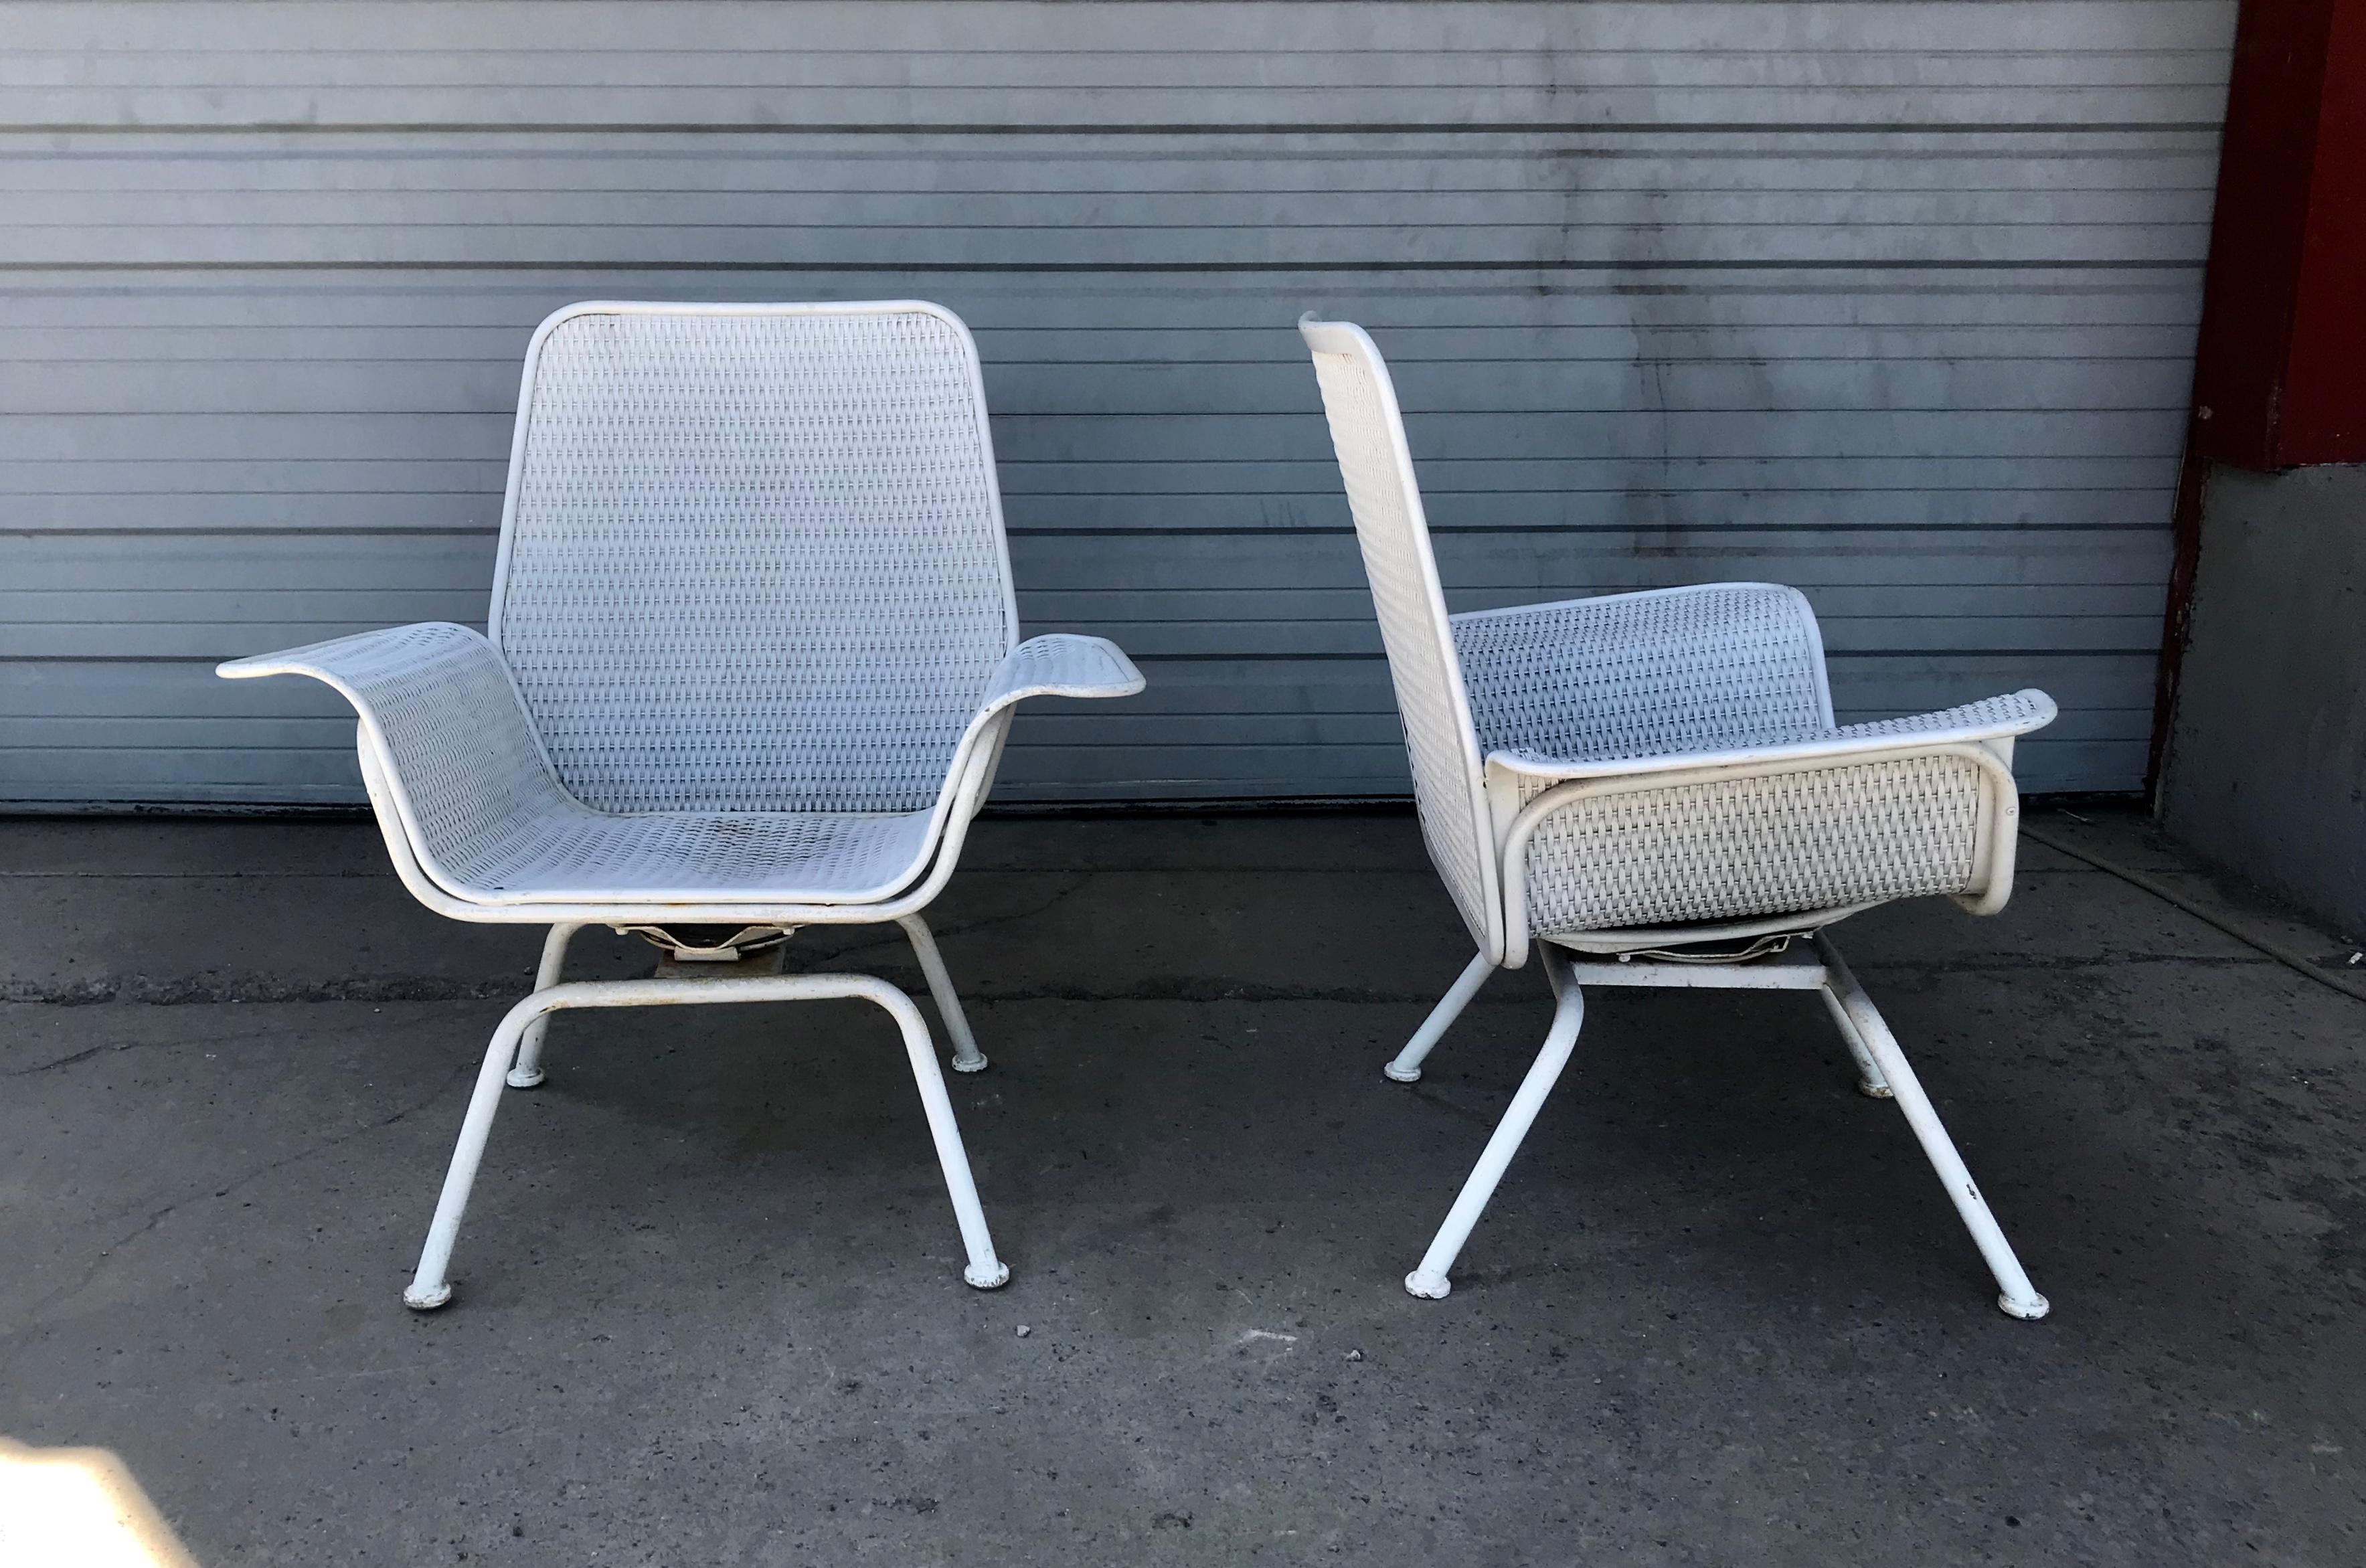 Pair of Mid-Century Modern Wicker and Metal Outdoor Lounge Chairs, Woodard 1